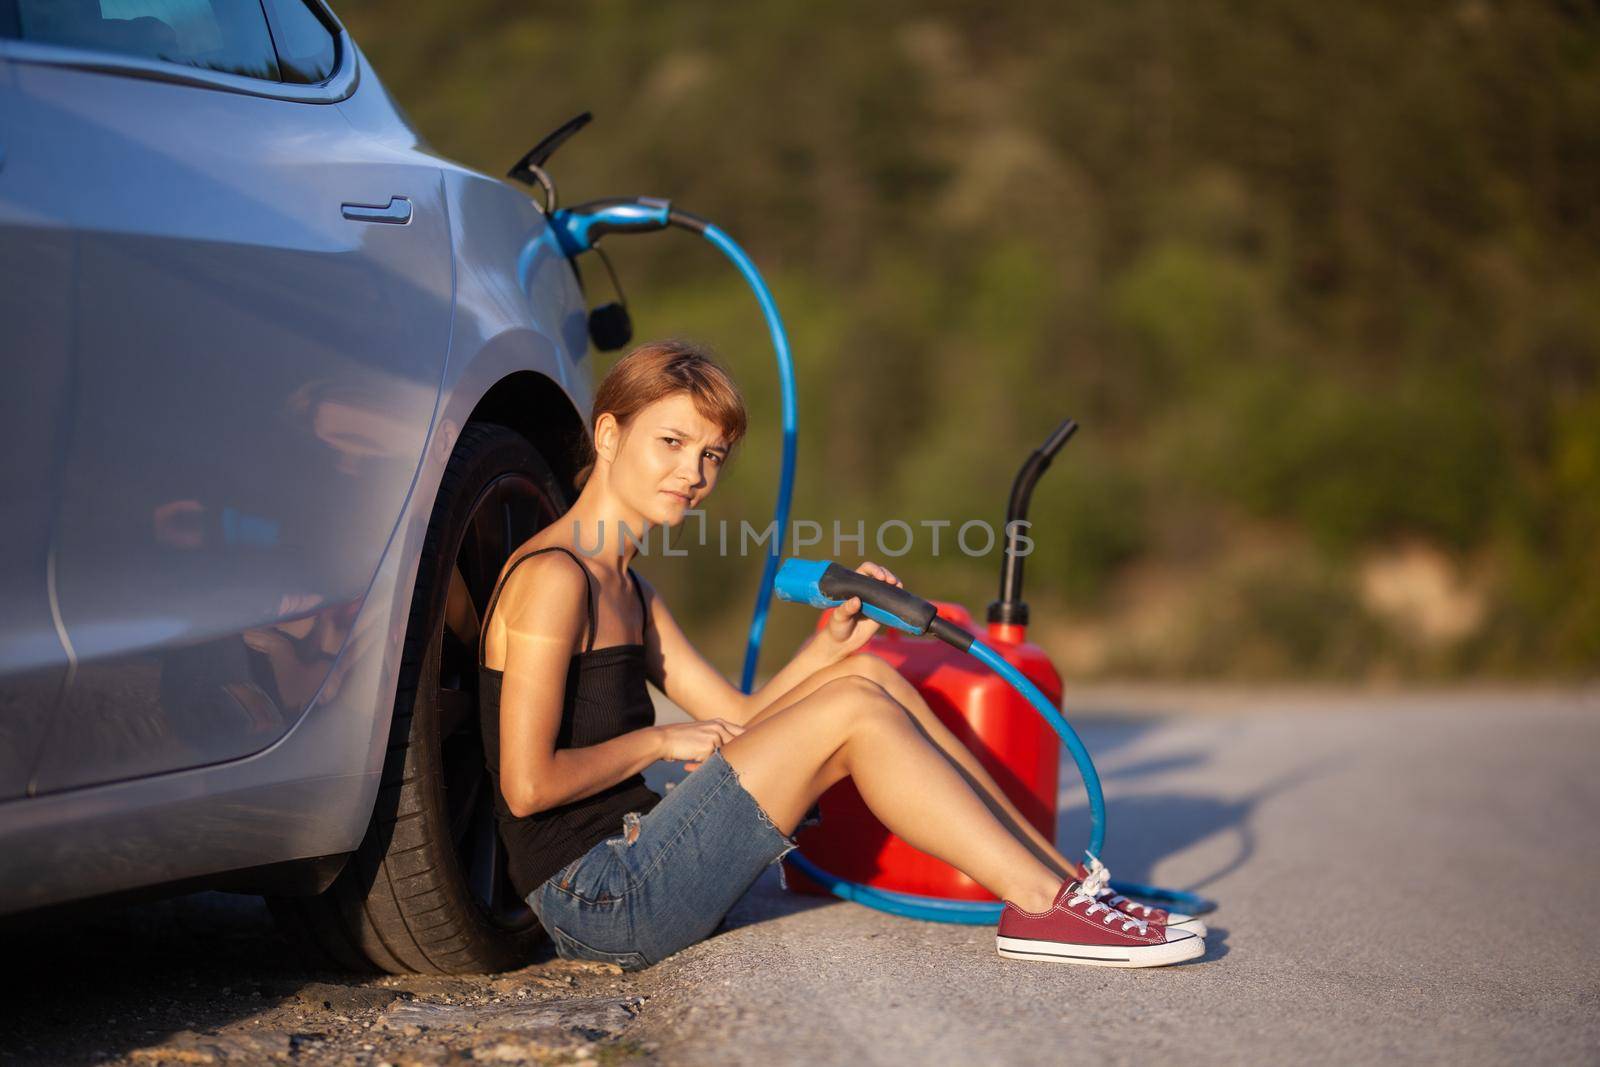 Sad girl sitting on the ground next to electric car. Holding charging cable and red gassoline canister.